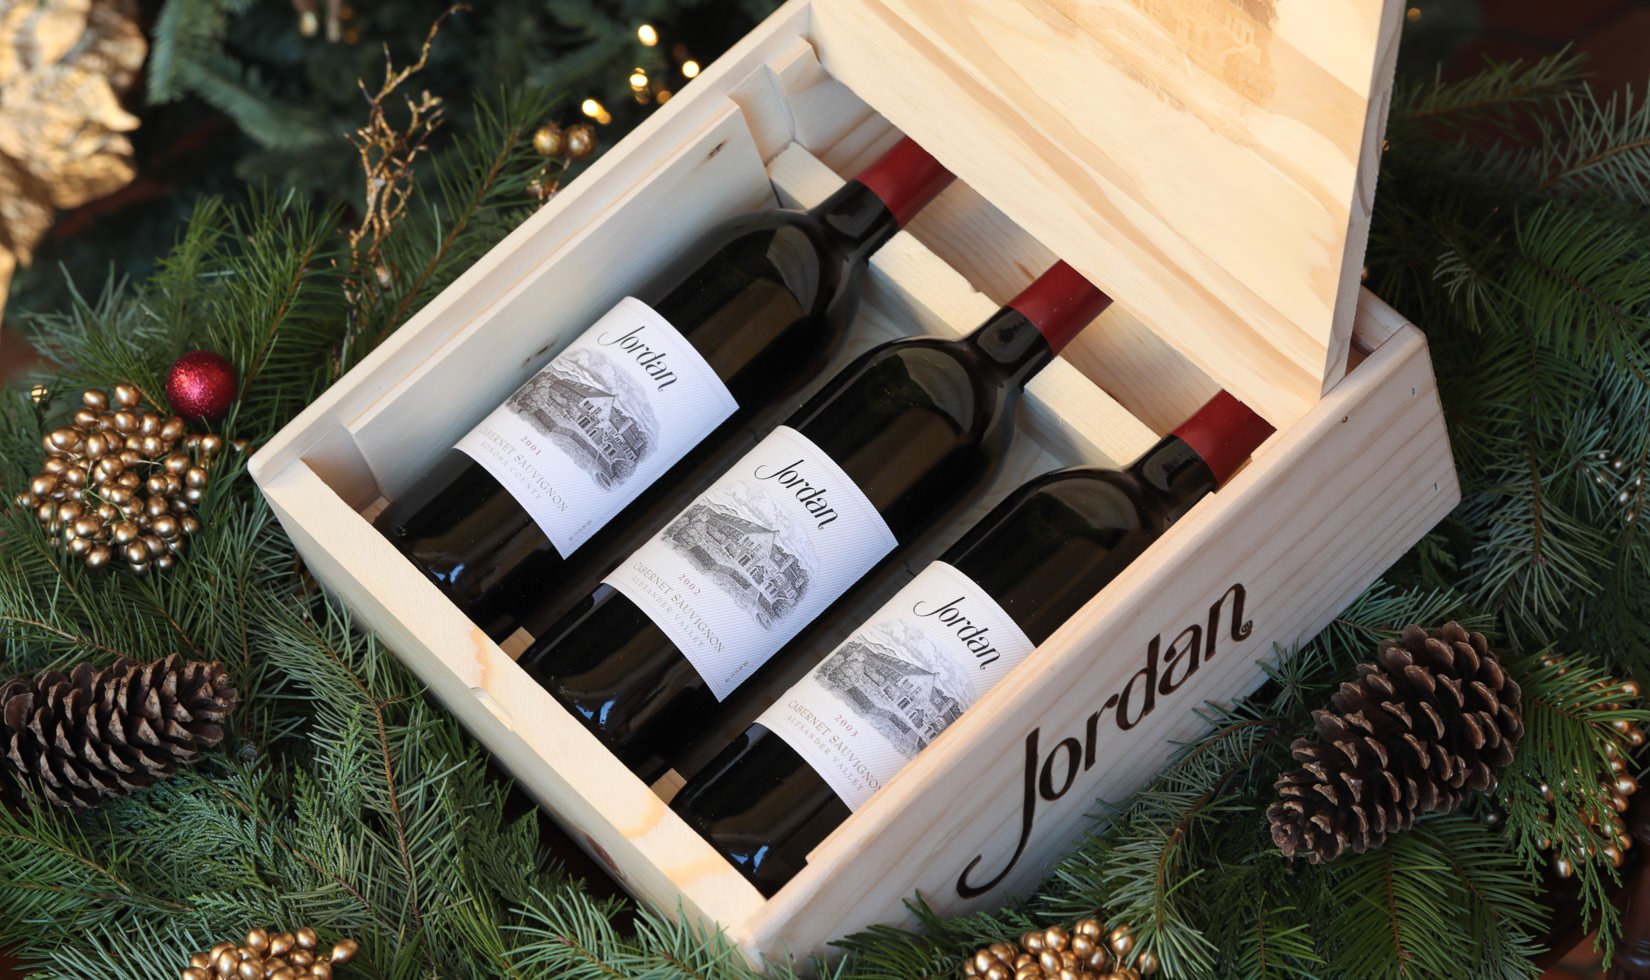 The new Jordan Vertical Wooden Wine Box includes 2001, 2002 and 2003 Jordan Cabernet Sauvignon in a wood box.